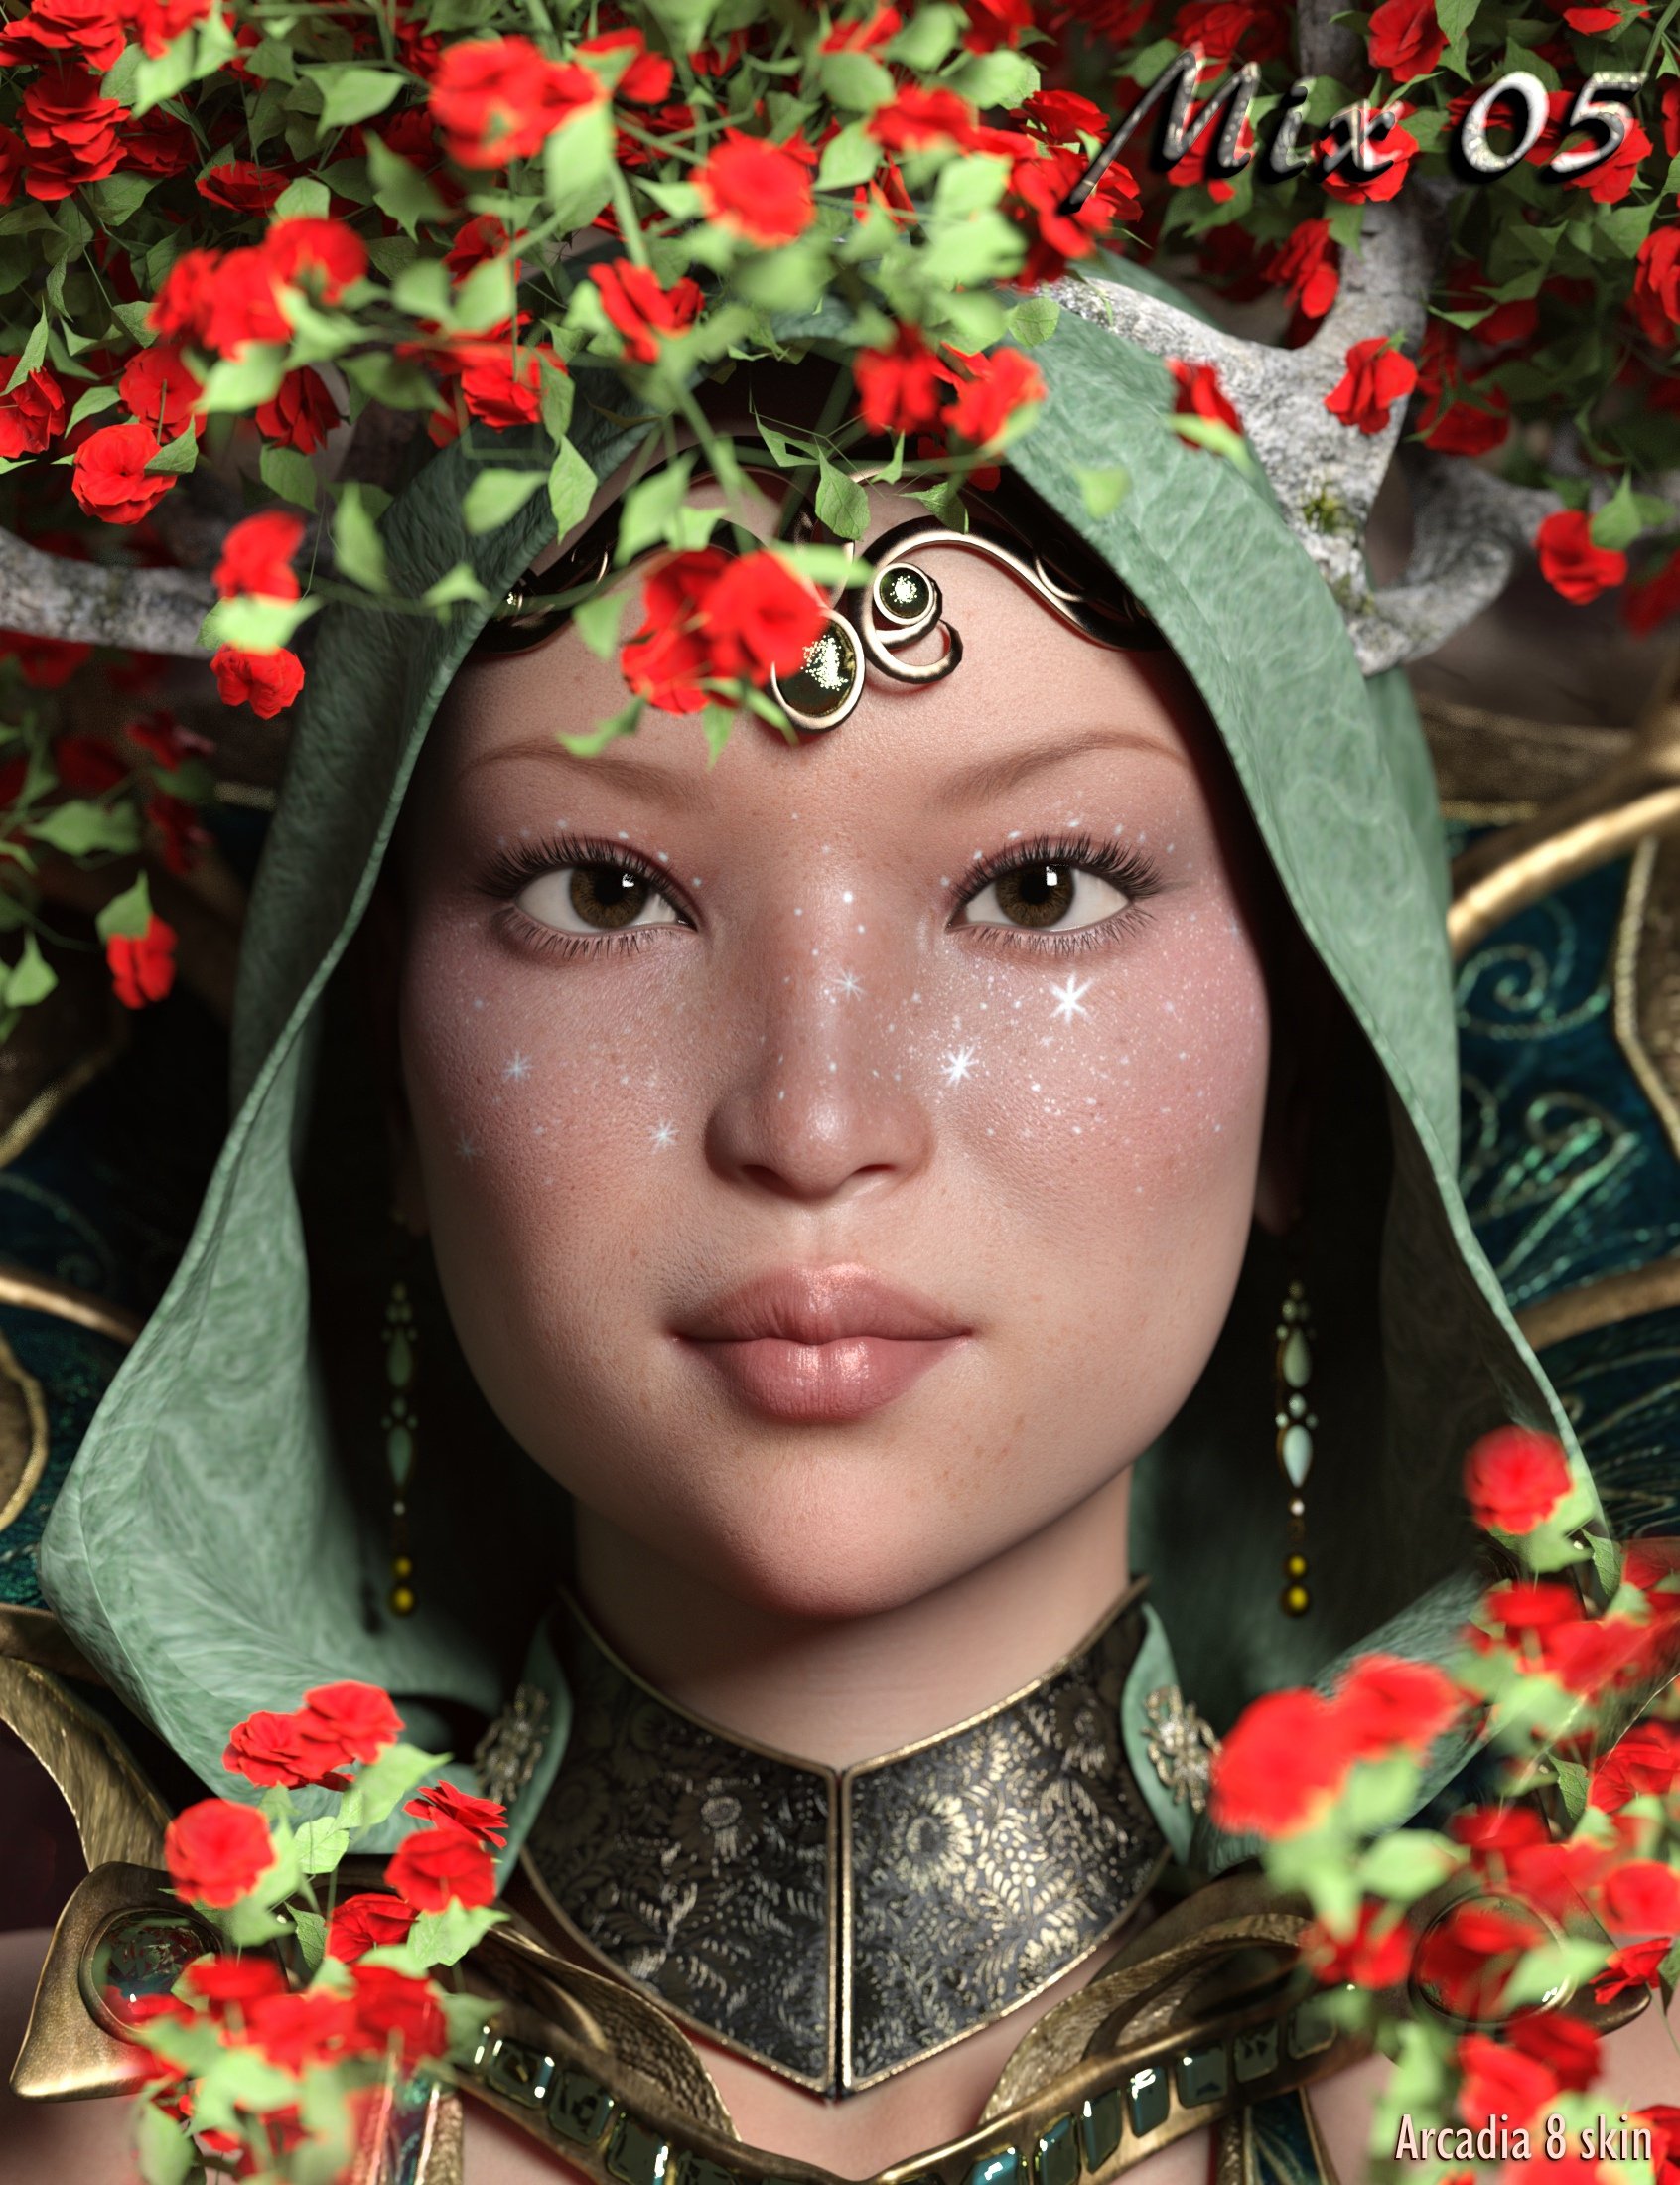 GHD Around The World - 10 plus 6 Faces for Genesis 8 and 8.1 Female by: 3D-GHDesign, 3D Models by Daz 3D